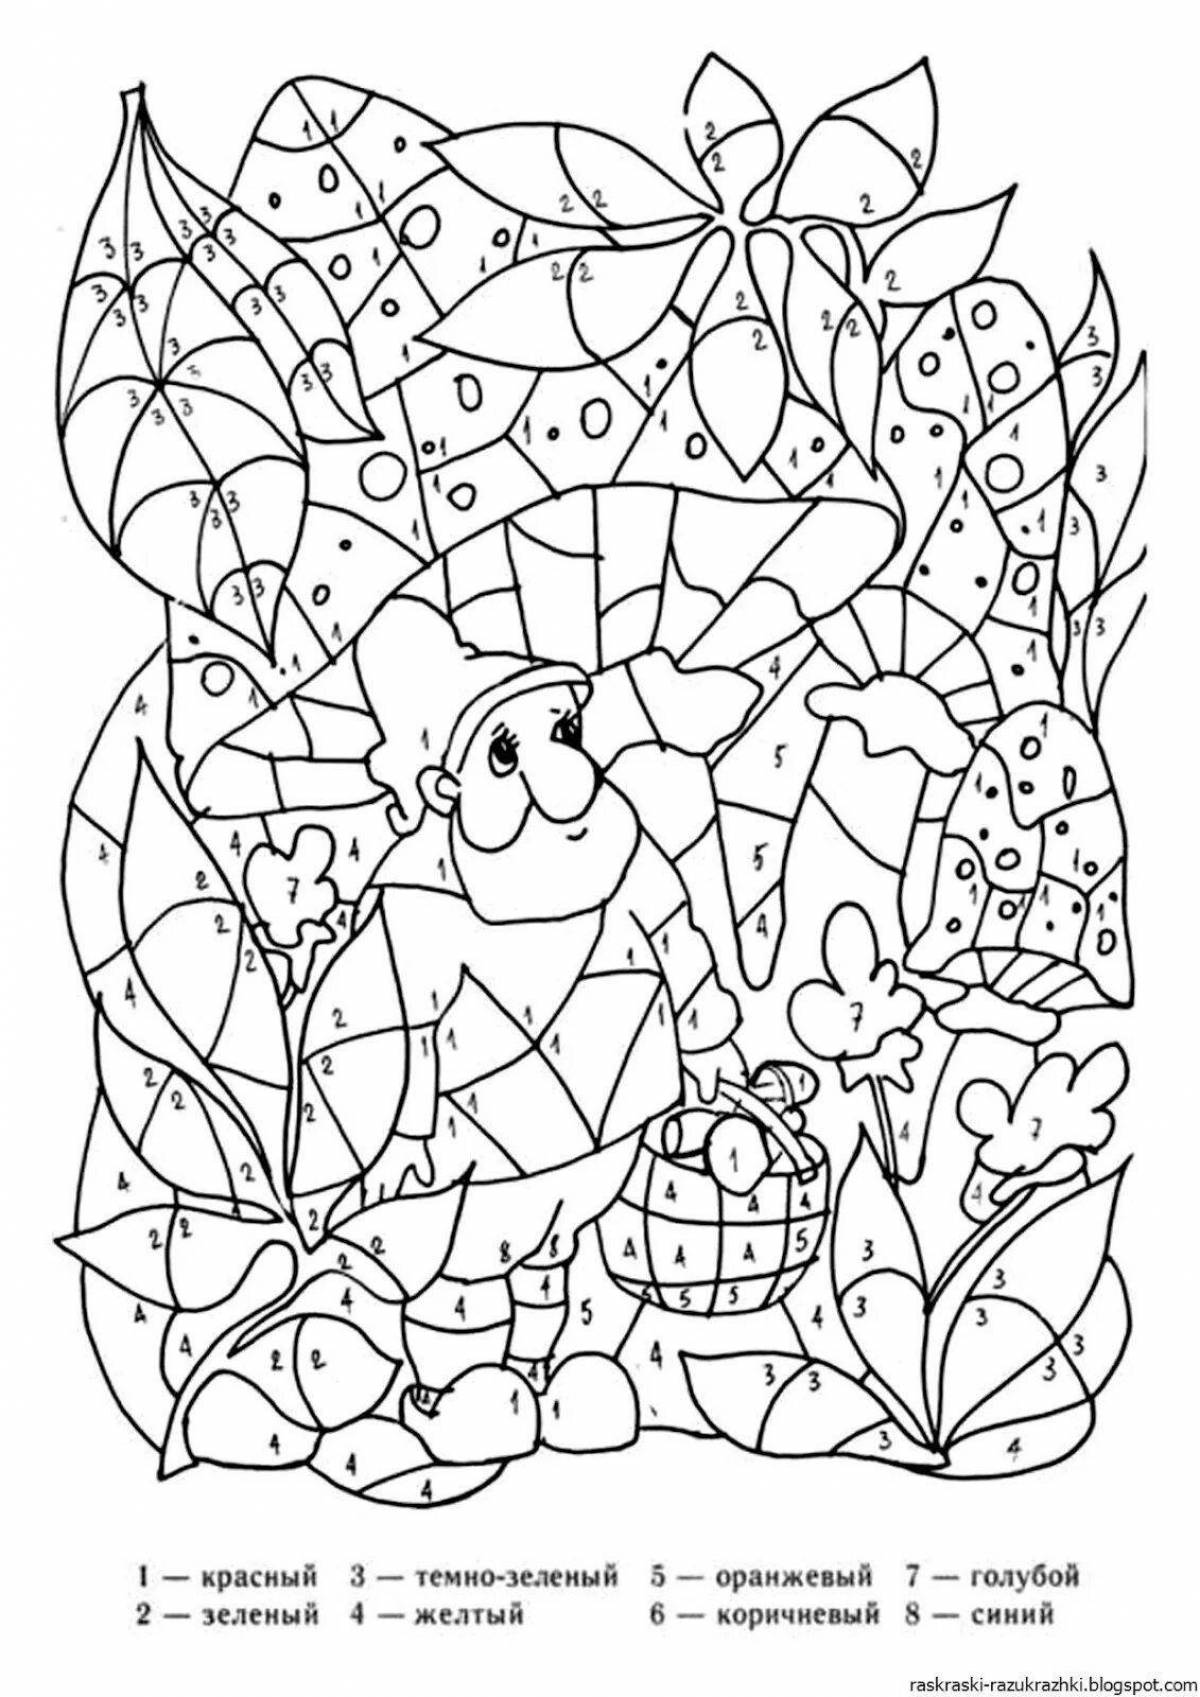 Fun coloring by numbers for children 5-7 years old